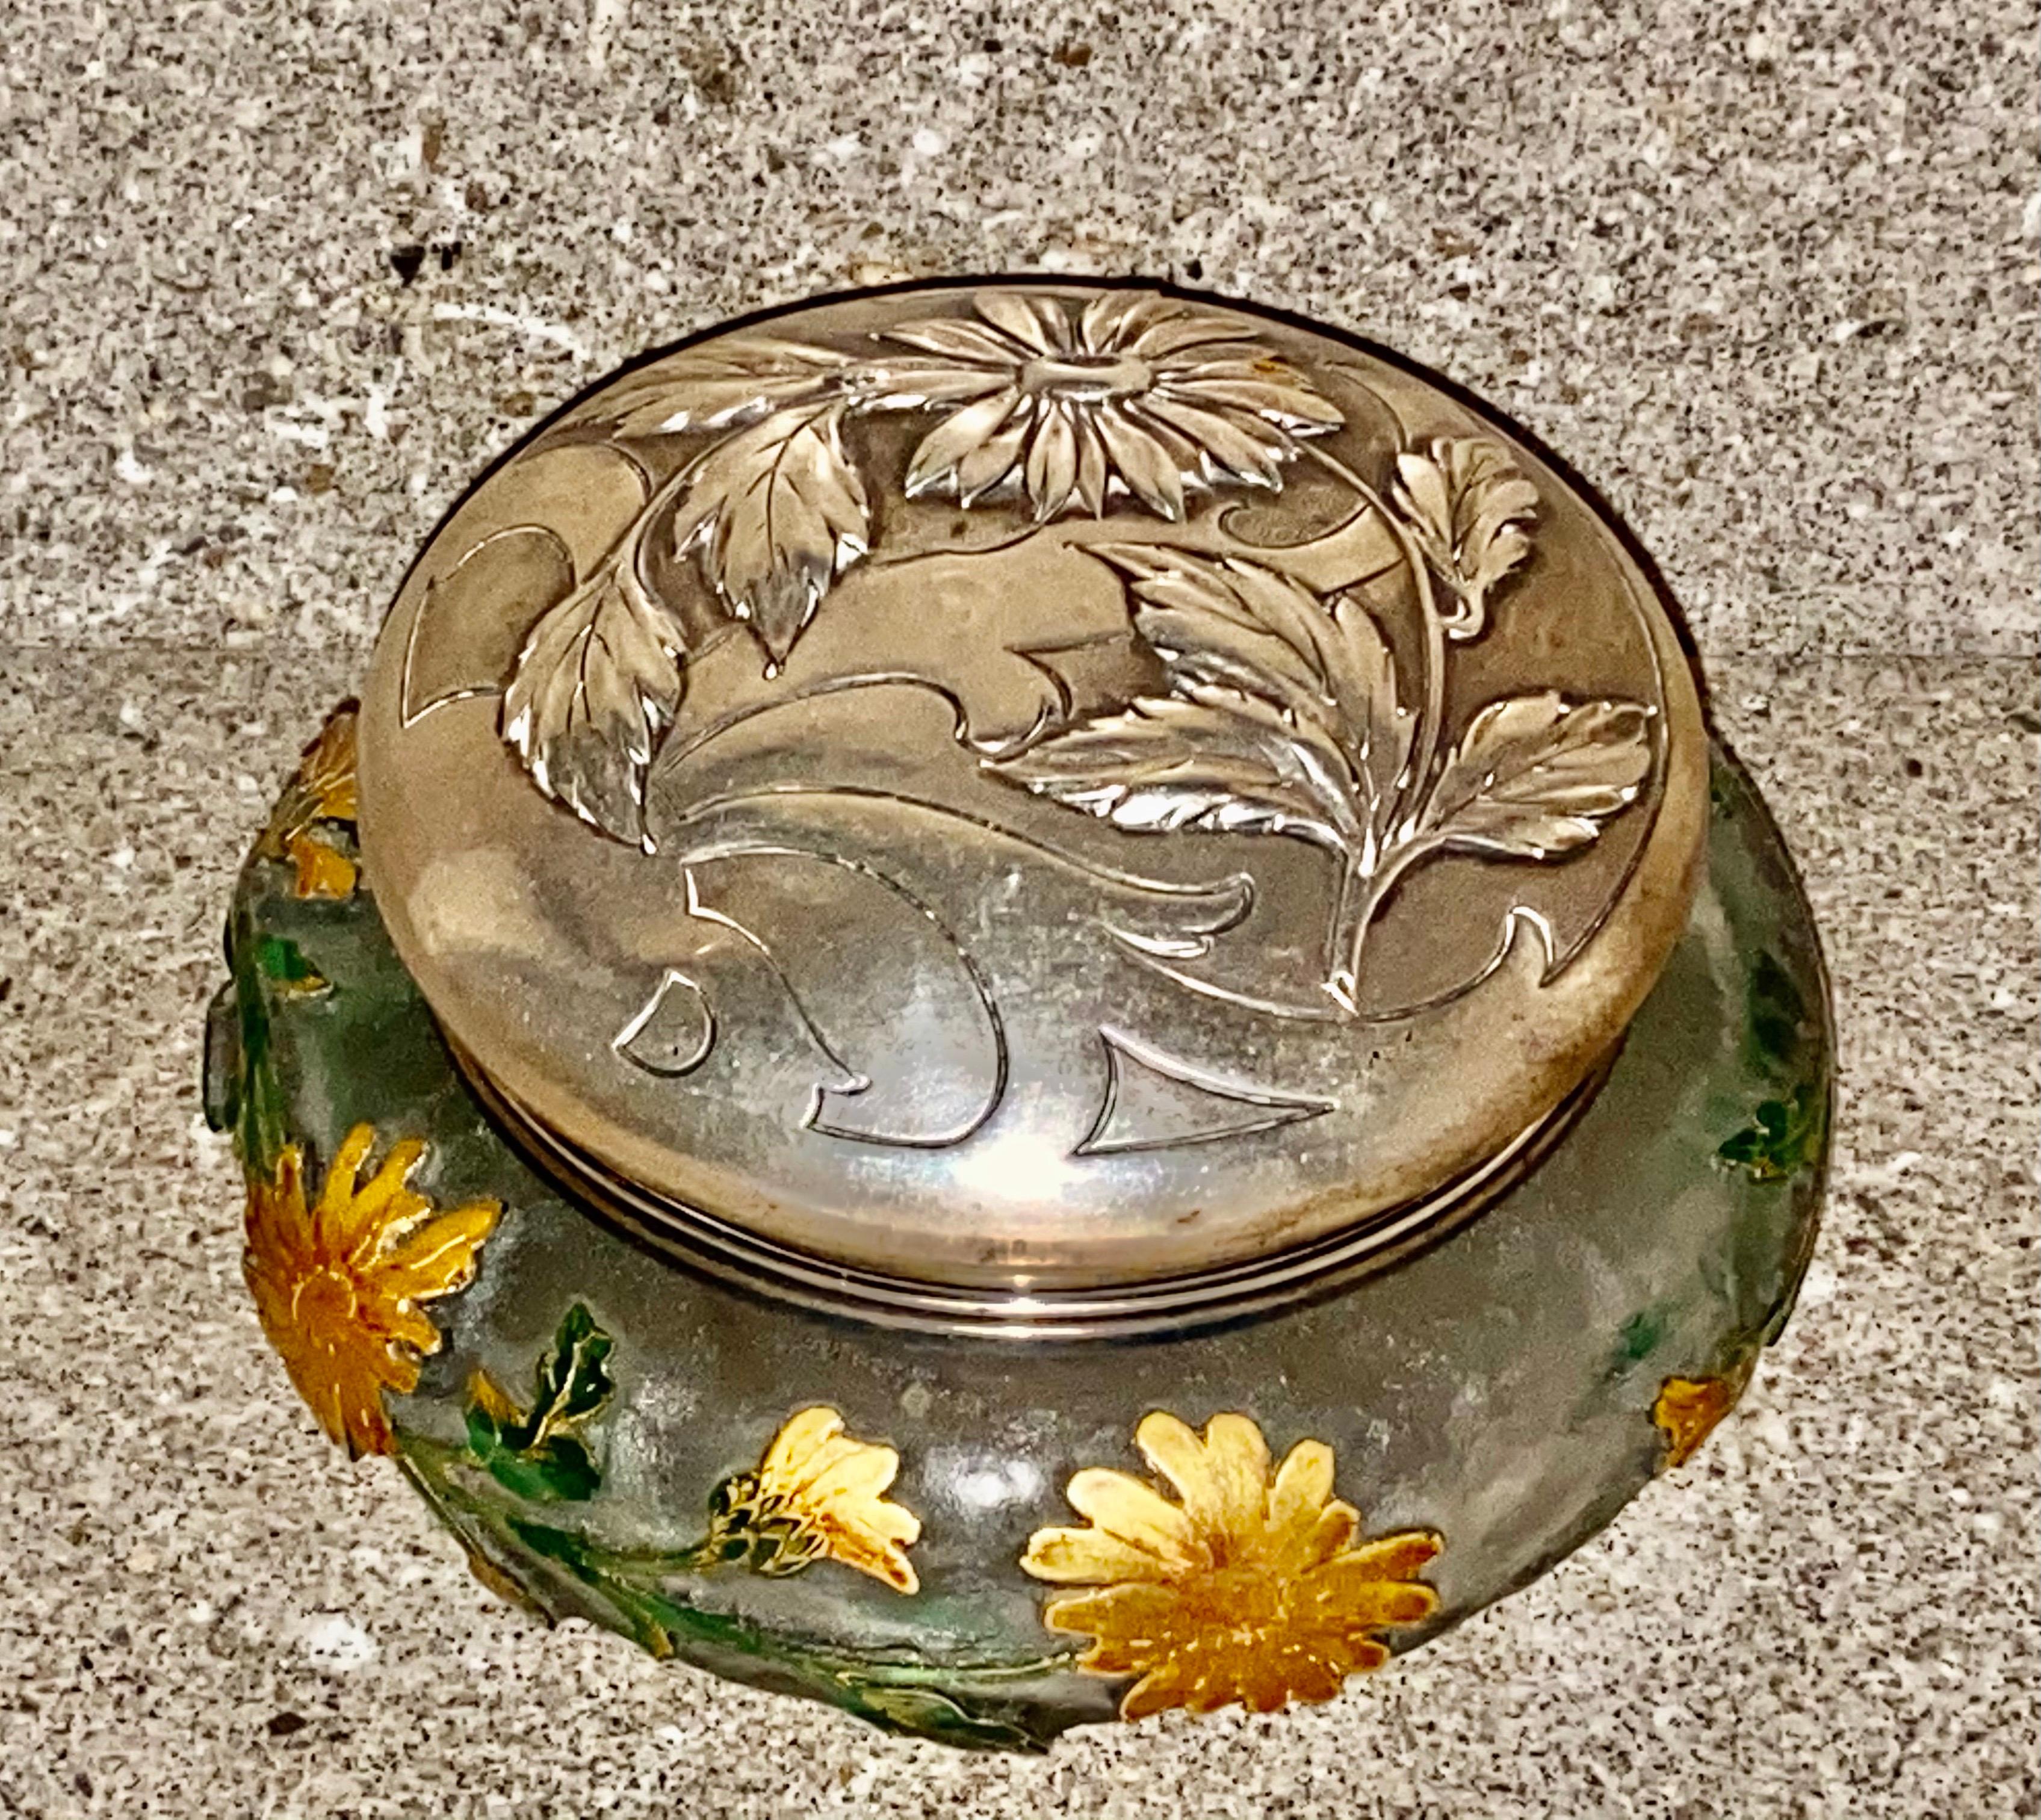 The frosted bowl overlaid and acid-etched with roses, the blooms picked out in gilt, the silver cover embossed with roses and rose hips, glass signed Daum Nancy with Cross of Lorraine.